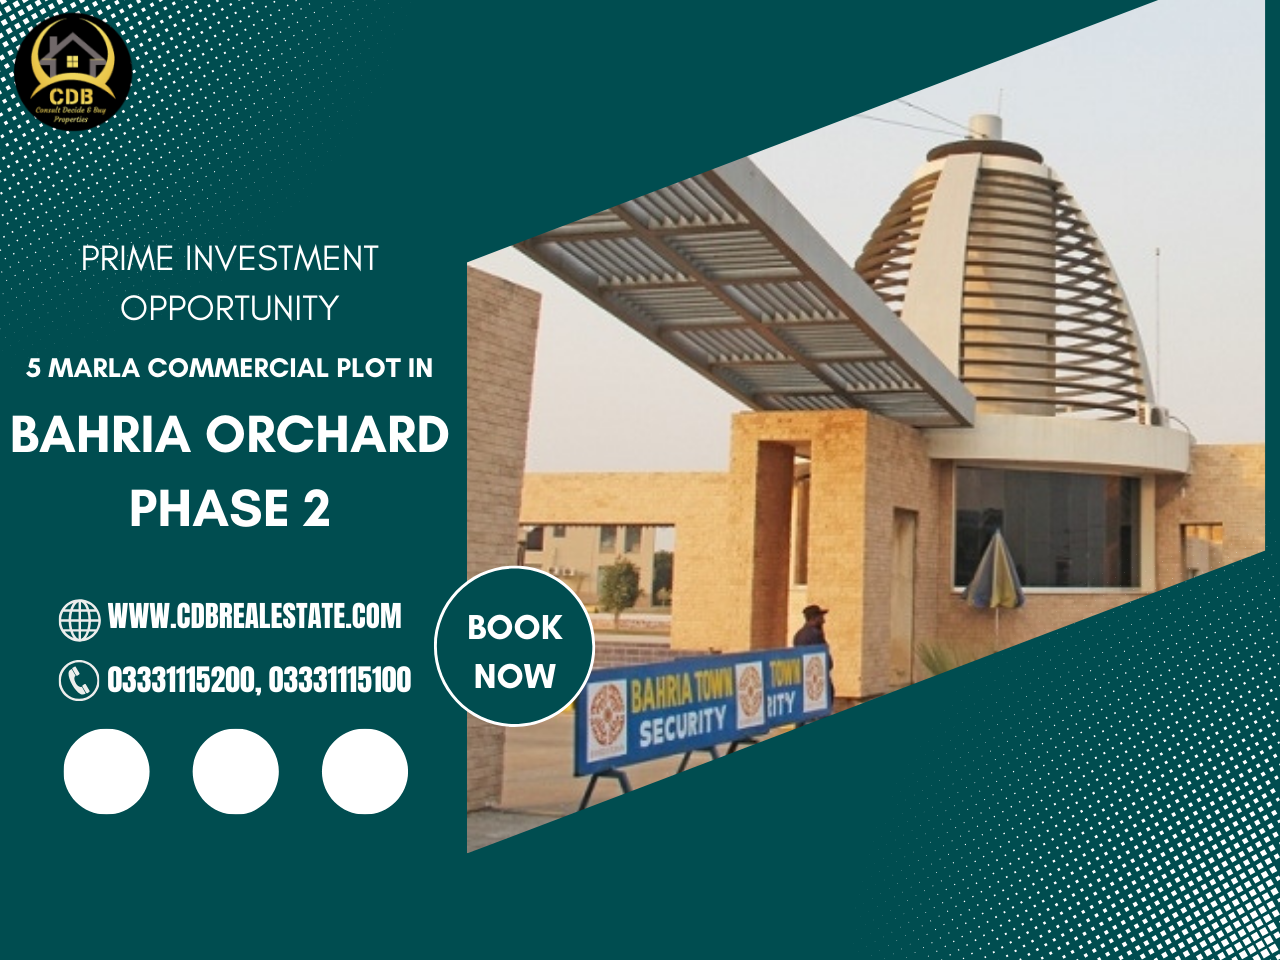 Prime Investment Opportunity 5 Marla Commercial Plot in Bahria Orchard Phase 2